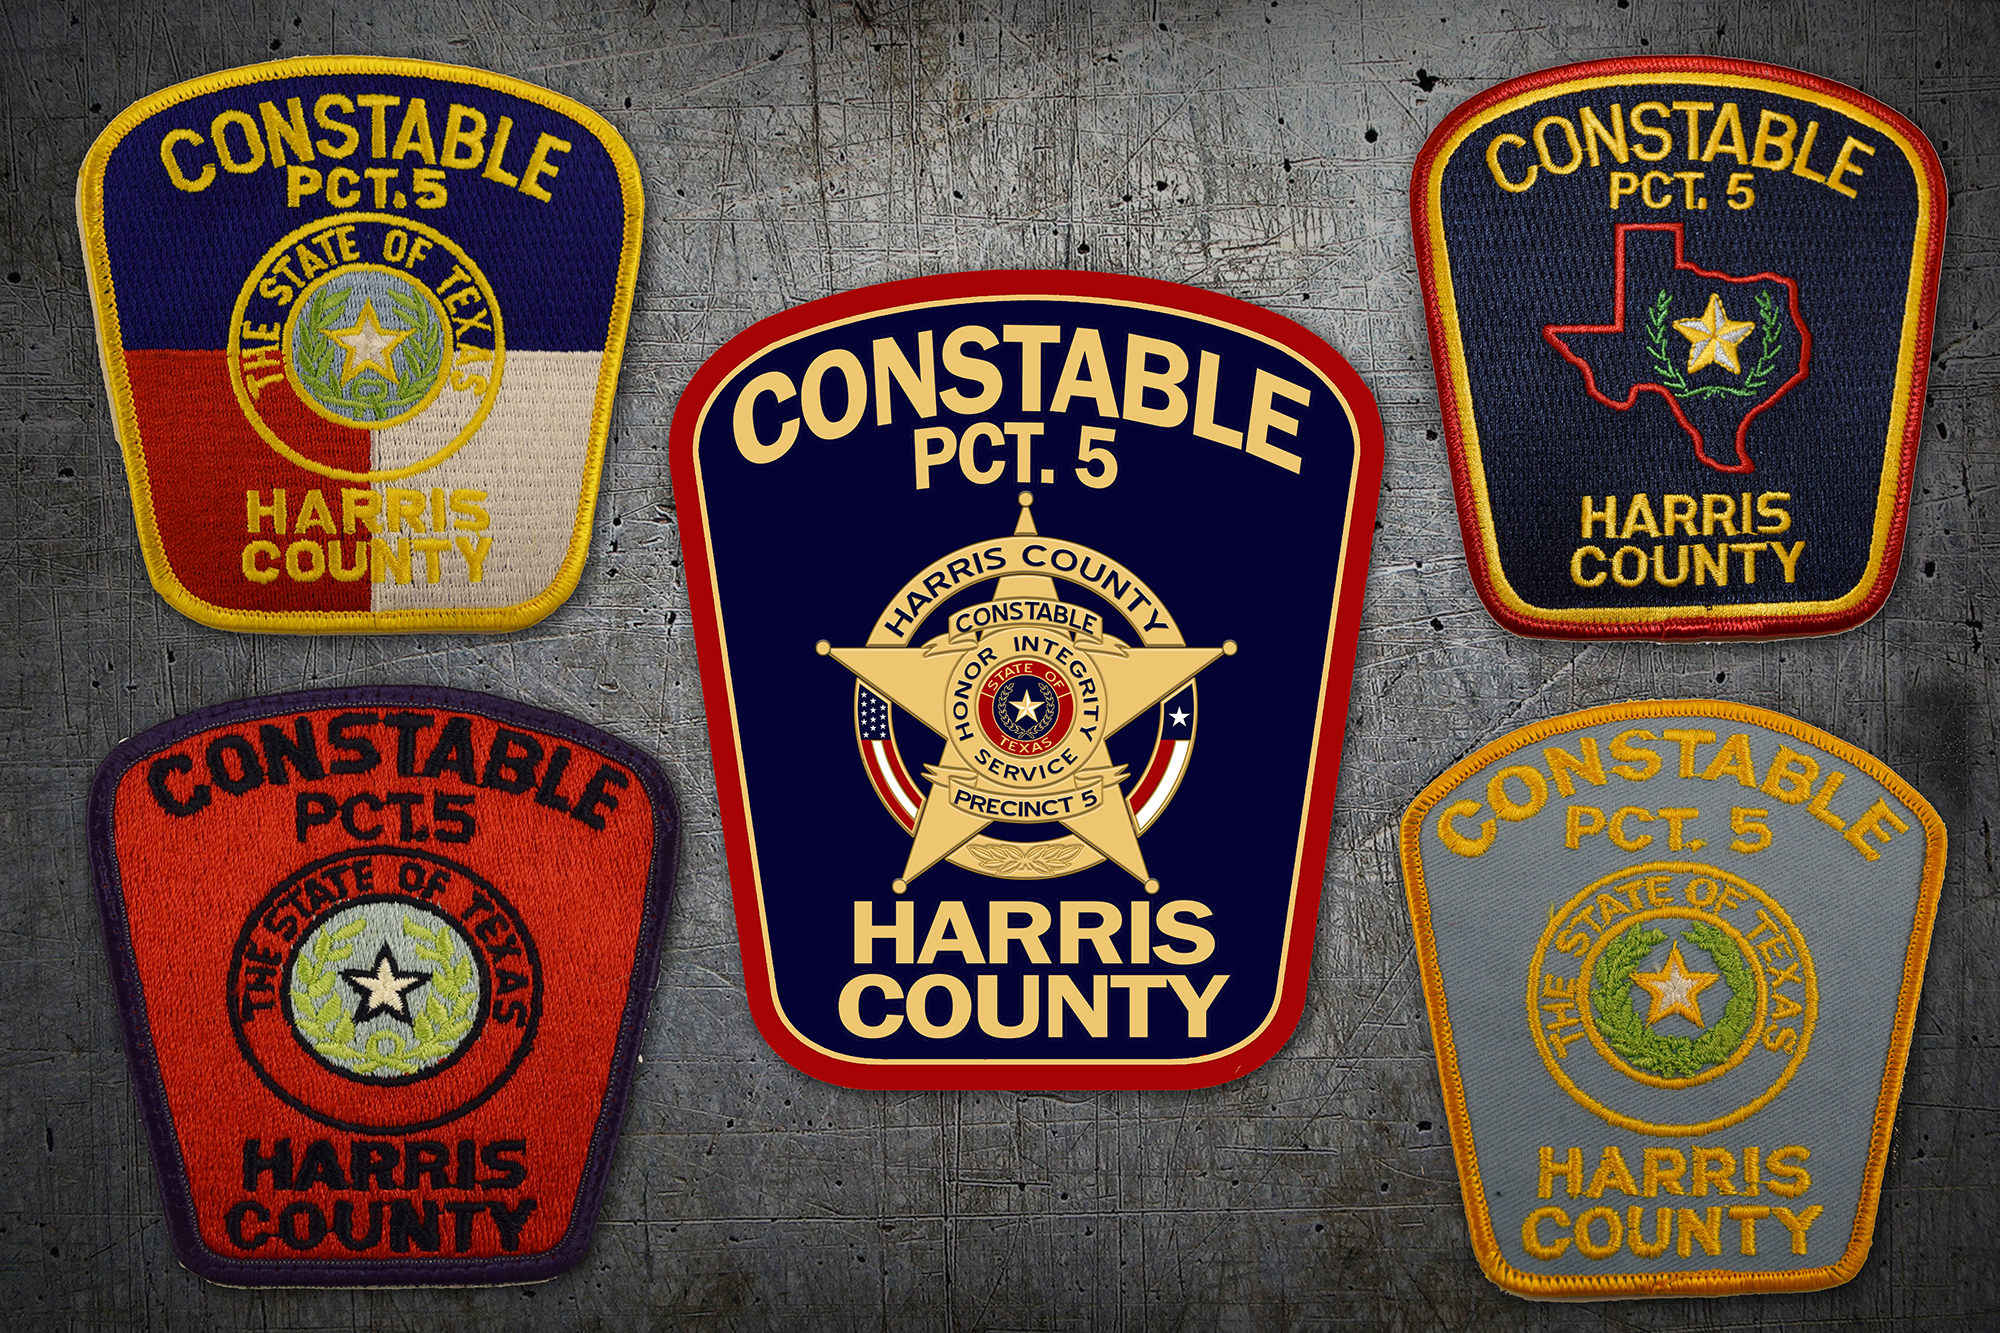 About Pct. 5 constablepct5